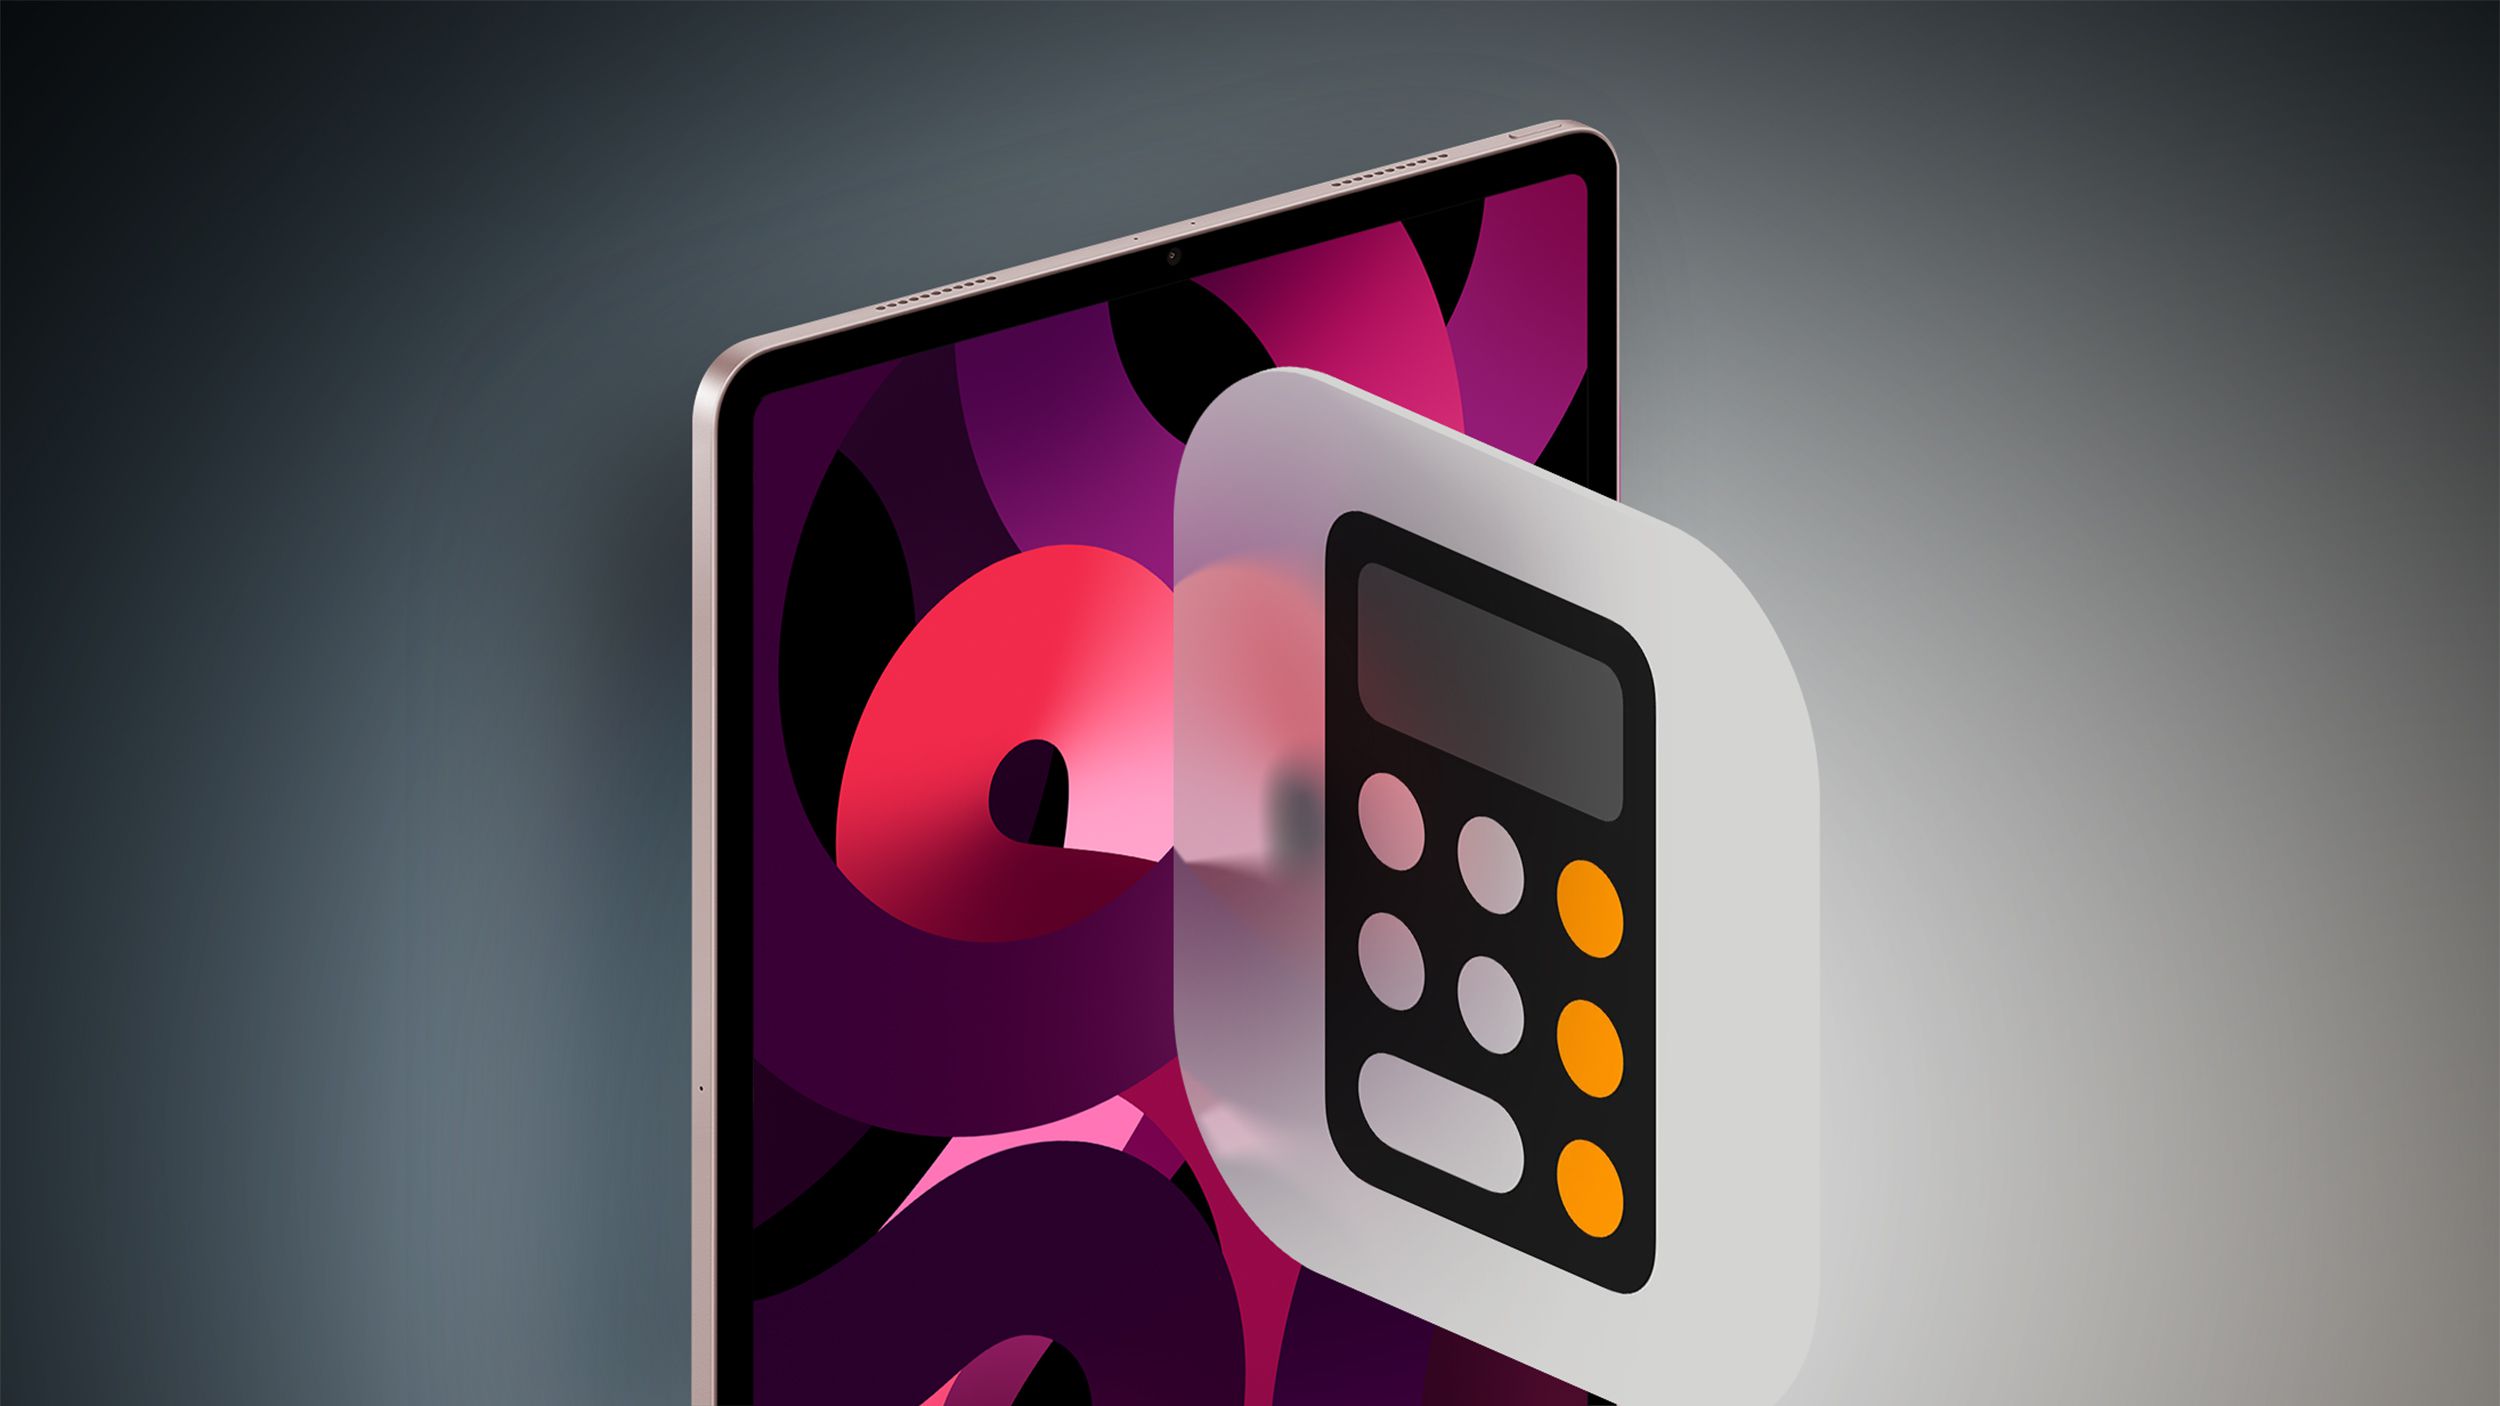 Apple is finally planning a Calculator app for the iPad, over 14 years after launching the device, according to a source familiar with the matter.  
